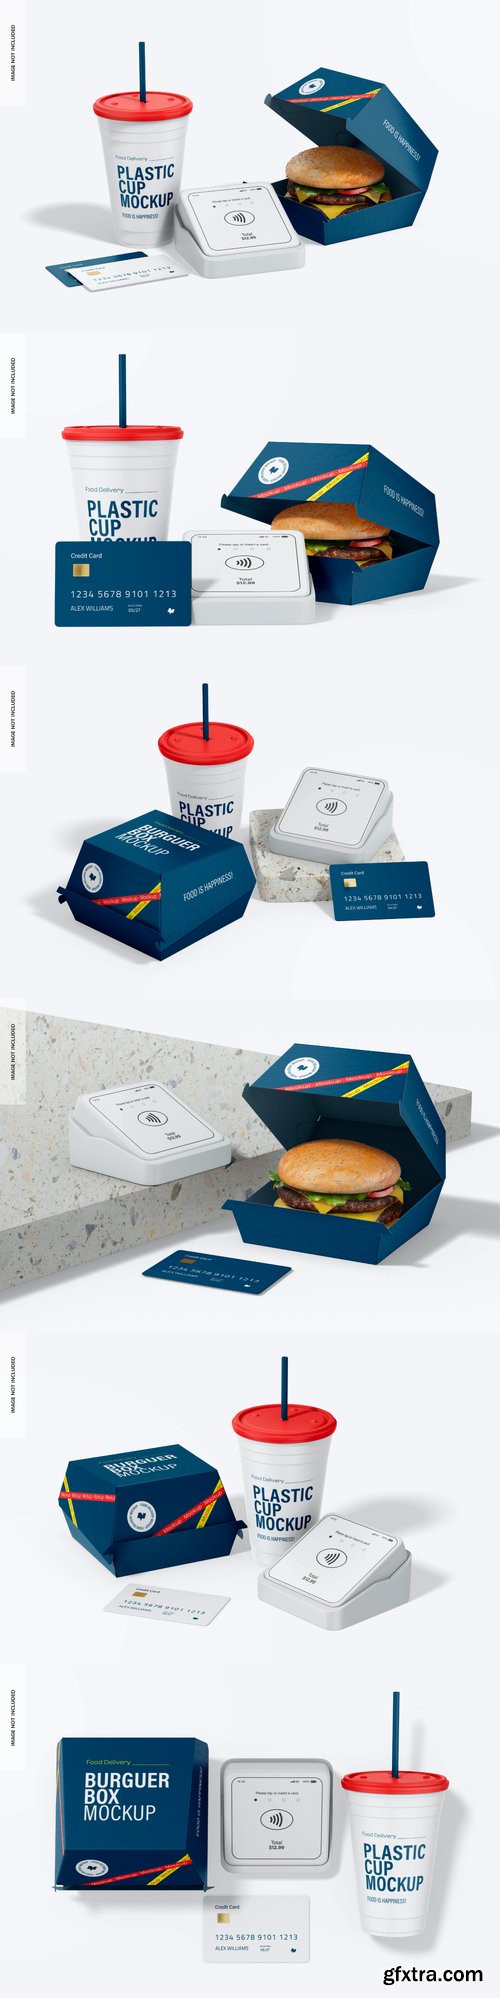 Fast food with payment device mockup